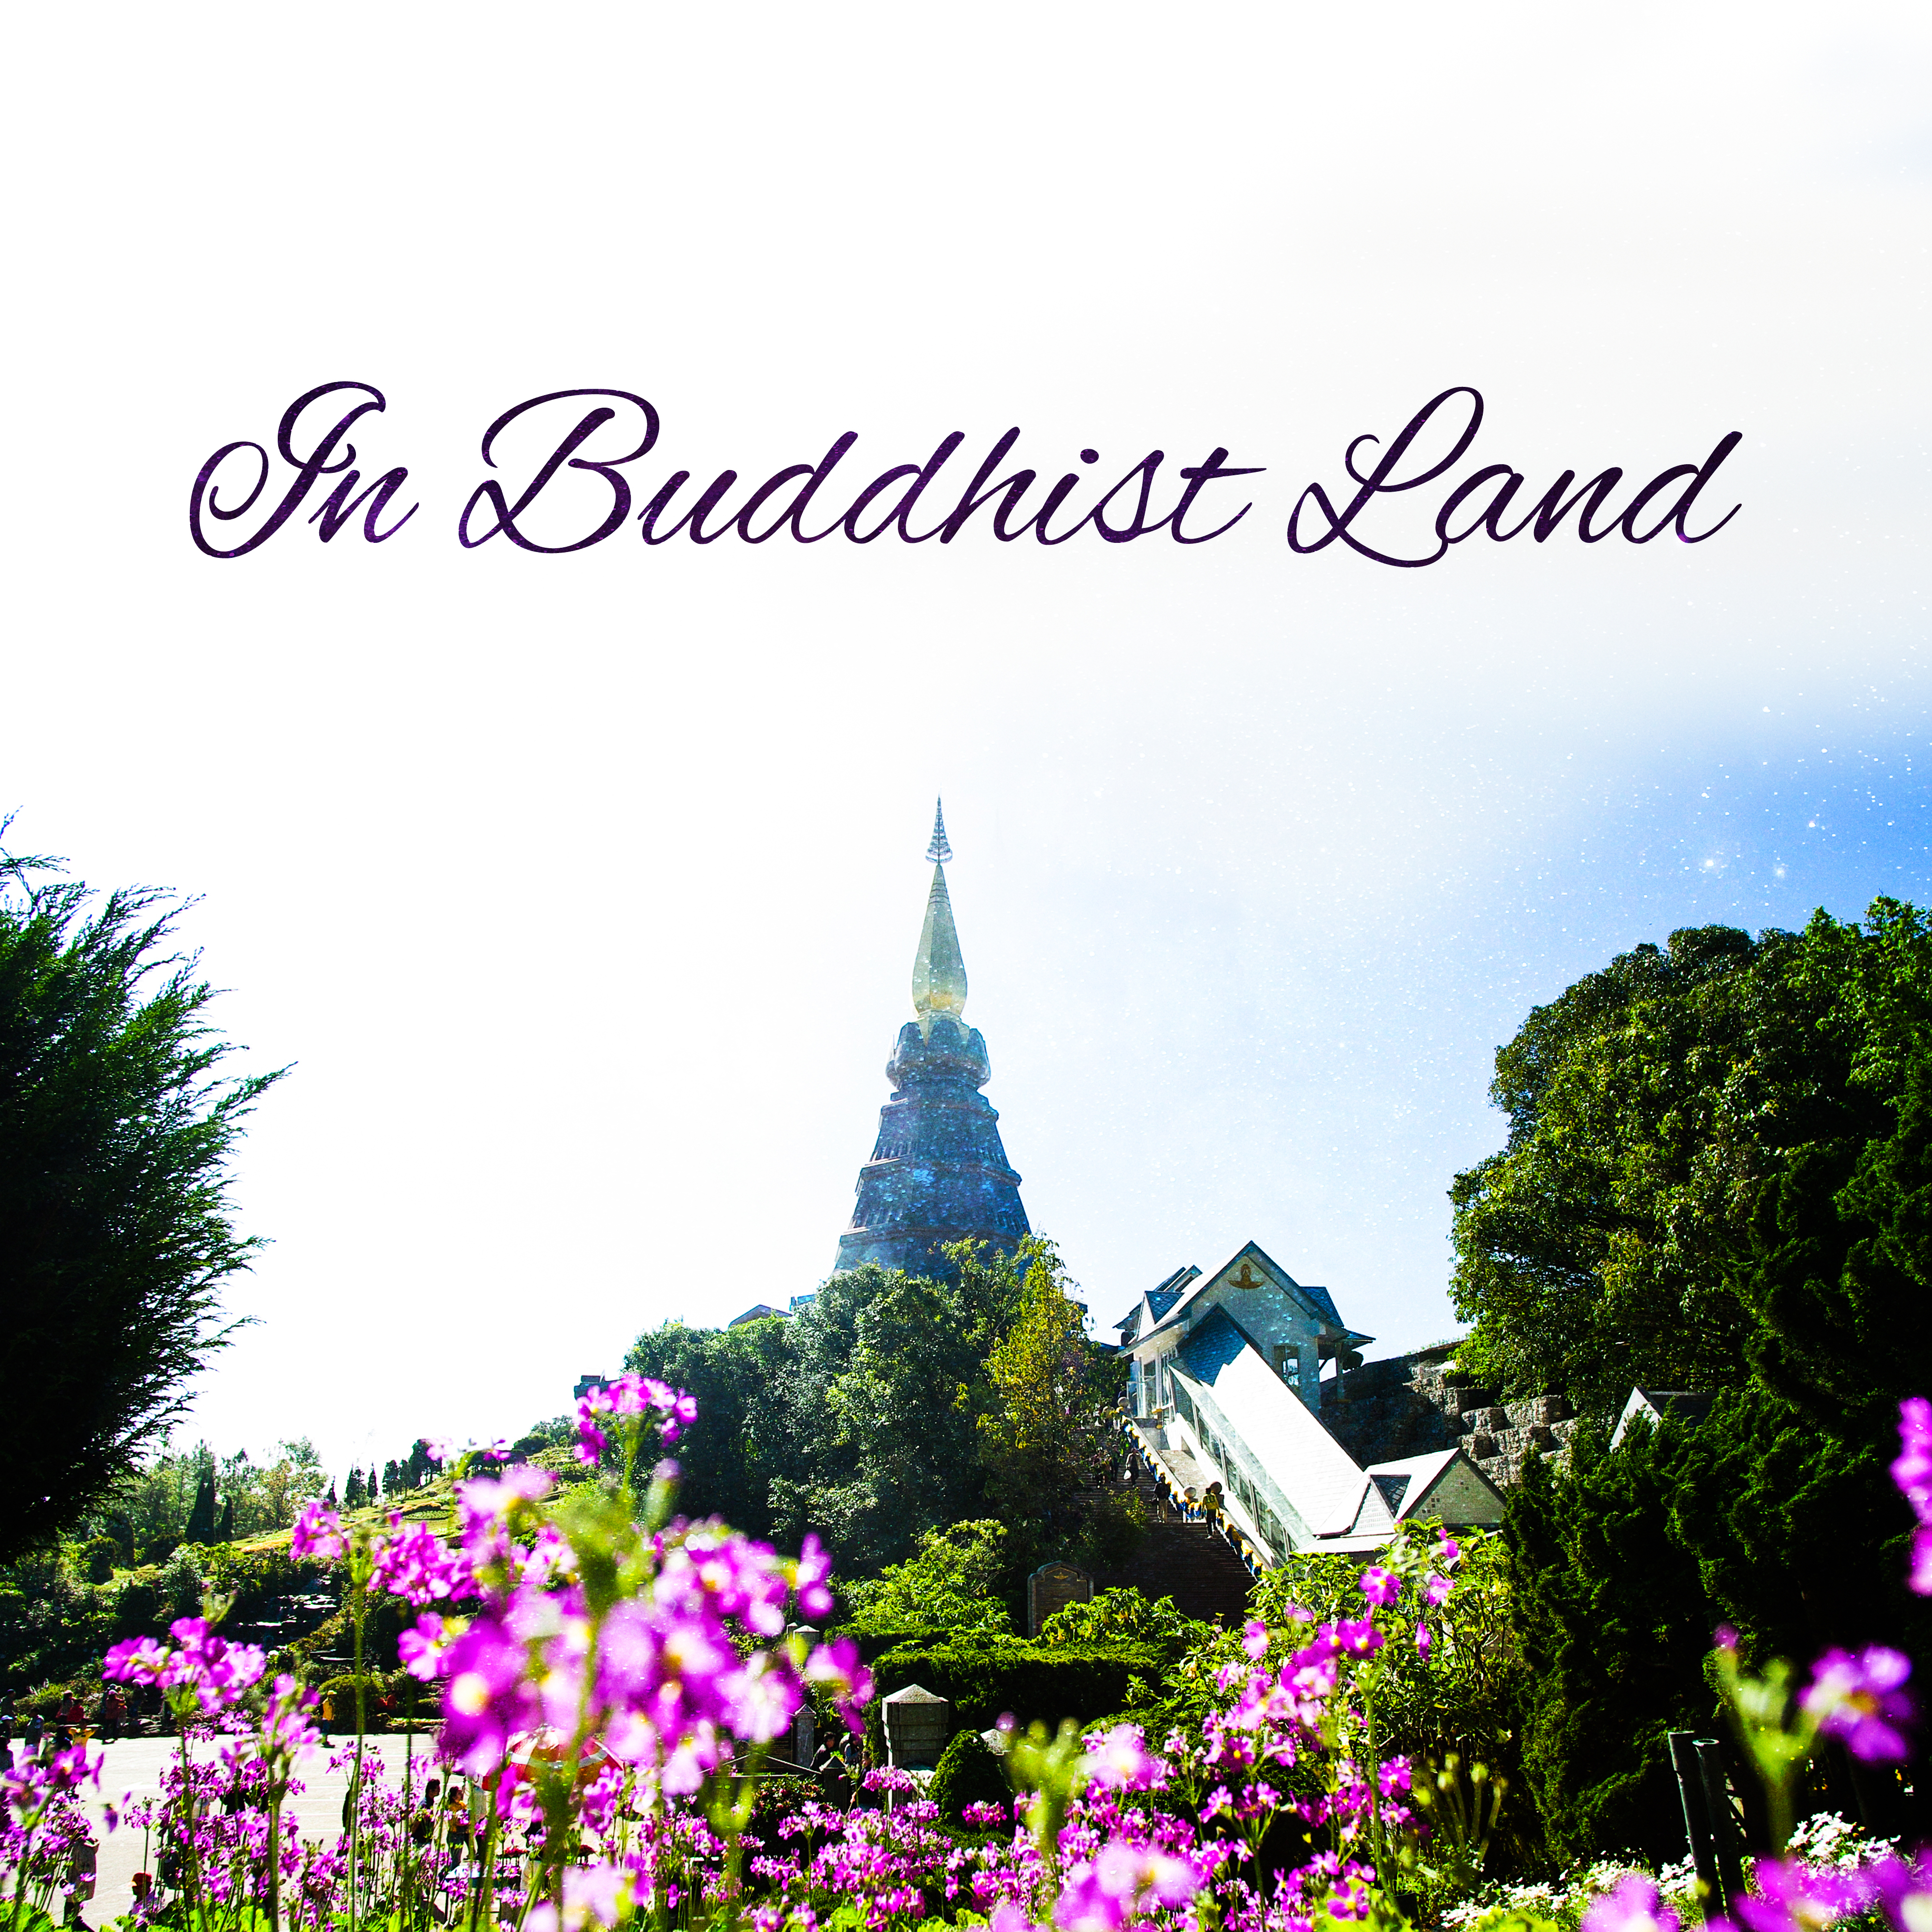 In Buddhist Land – Massage Therapy, Relaxation Sounds for Spa, Wellness, Peaceful Mind, Stress Relief, Meditation, Tranquility